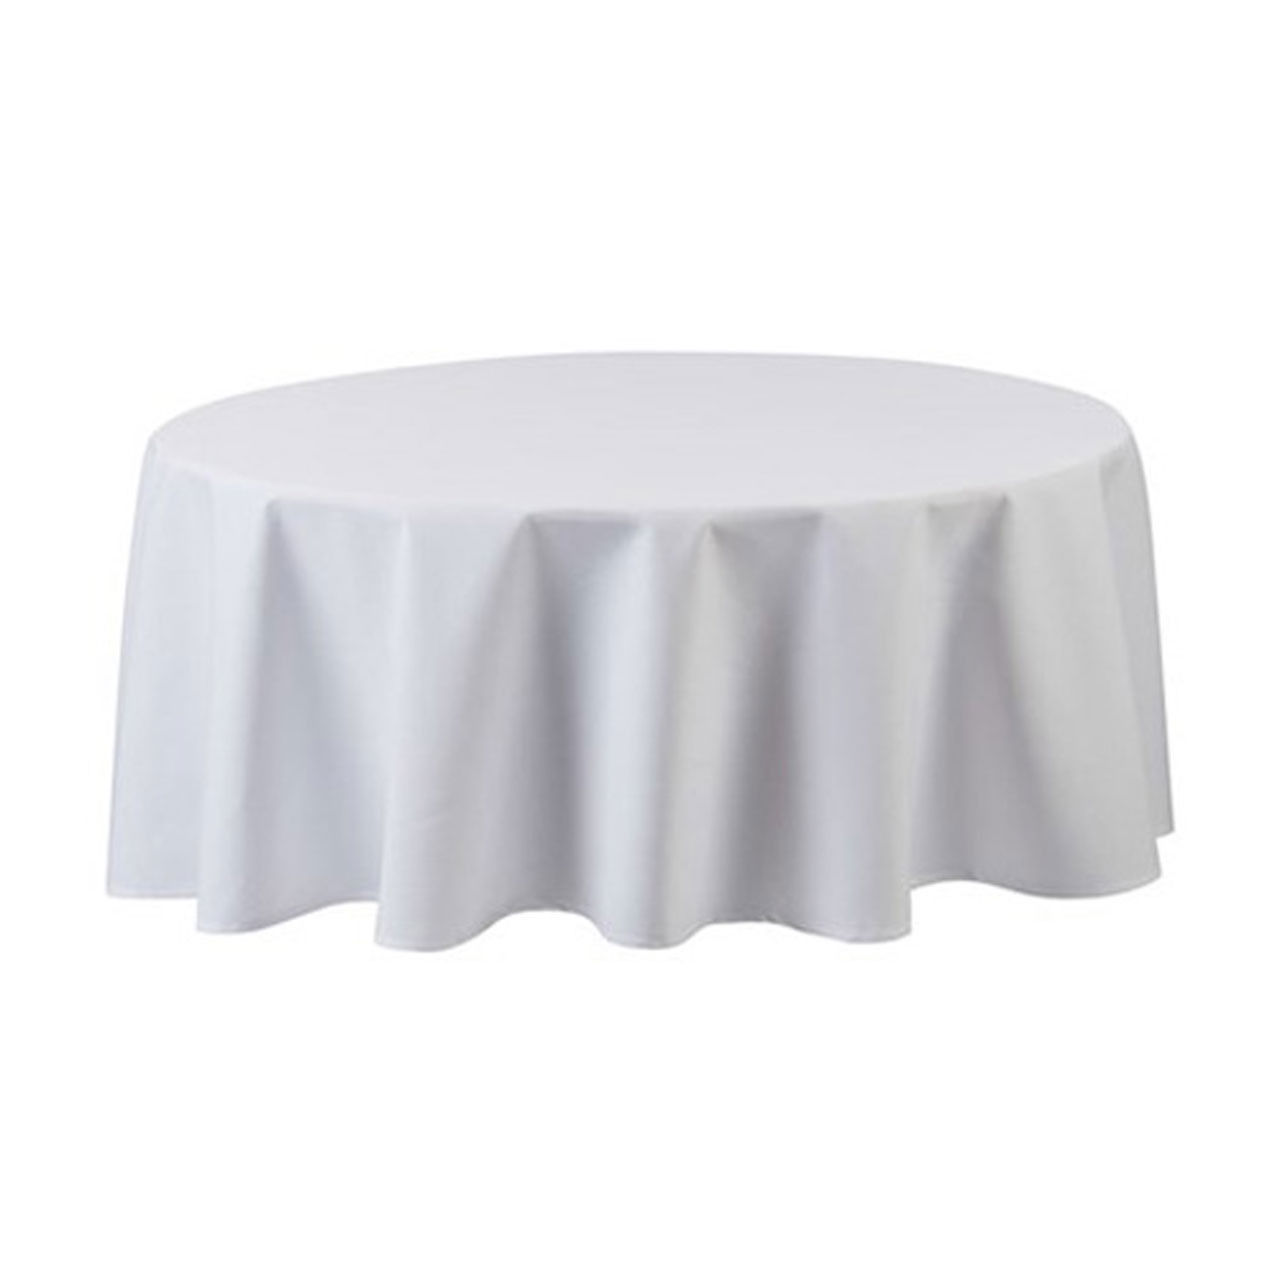 What is the material of the 120 round tablecloth for Seamless White?